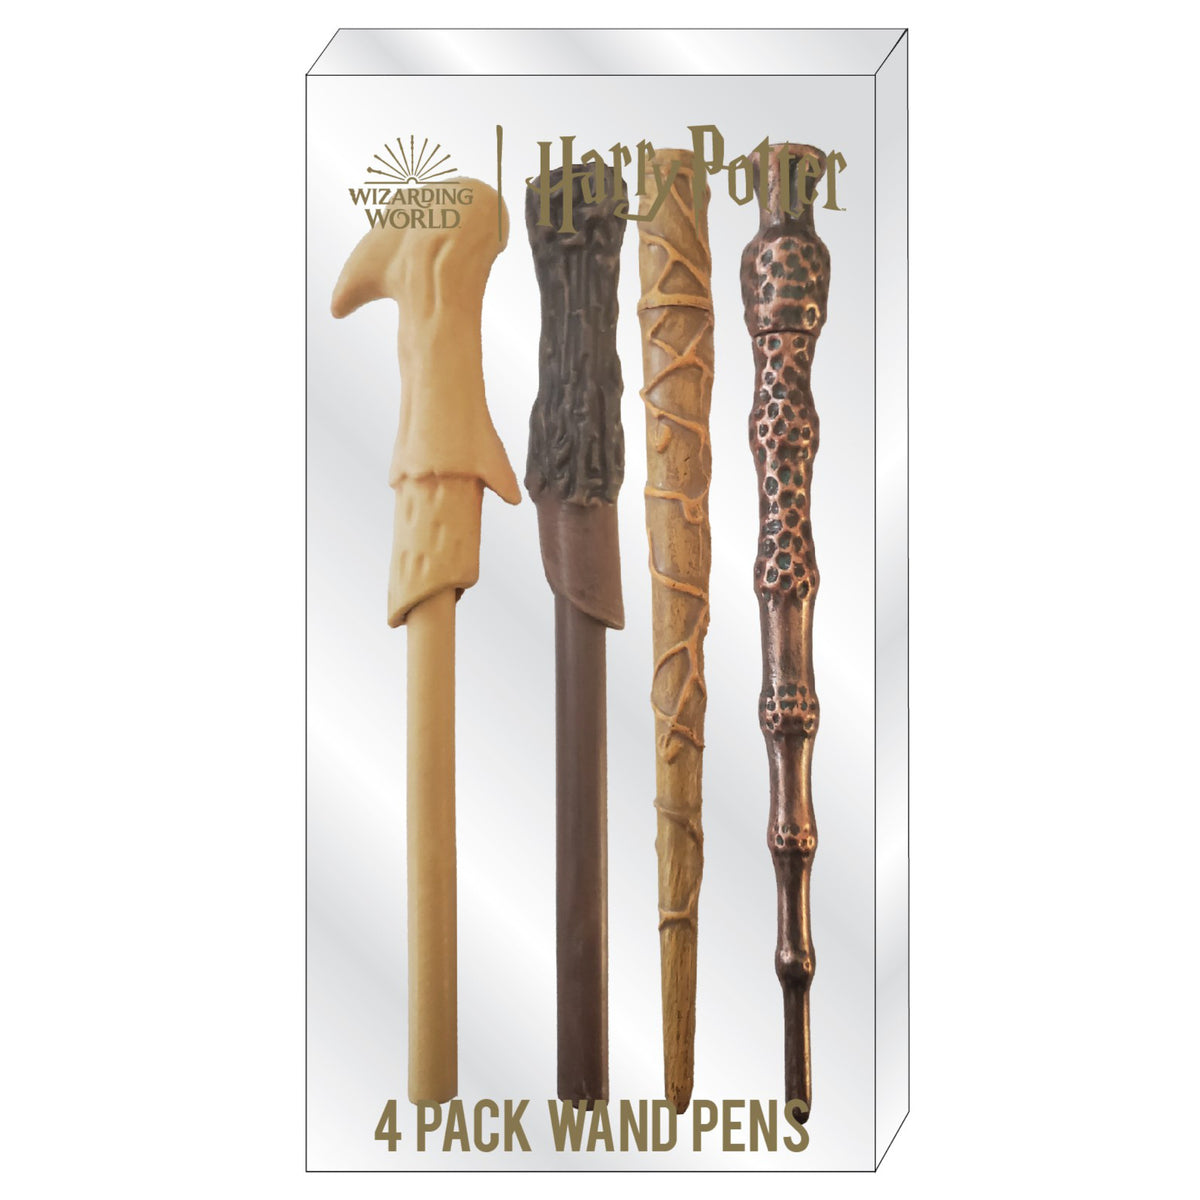 Harry Potter 4-Pack Wand Pens